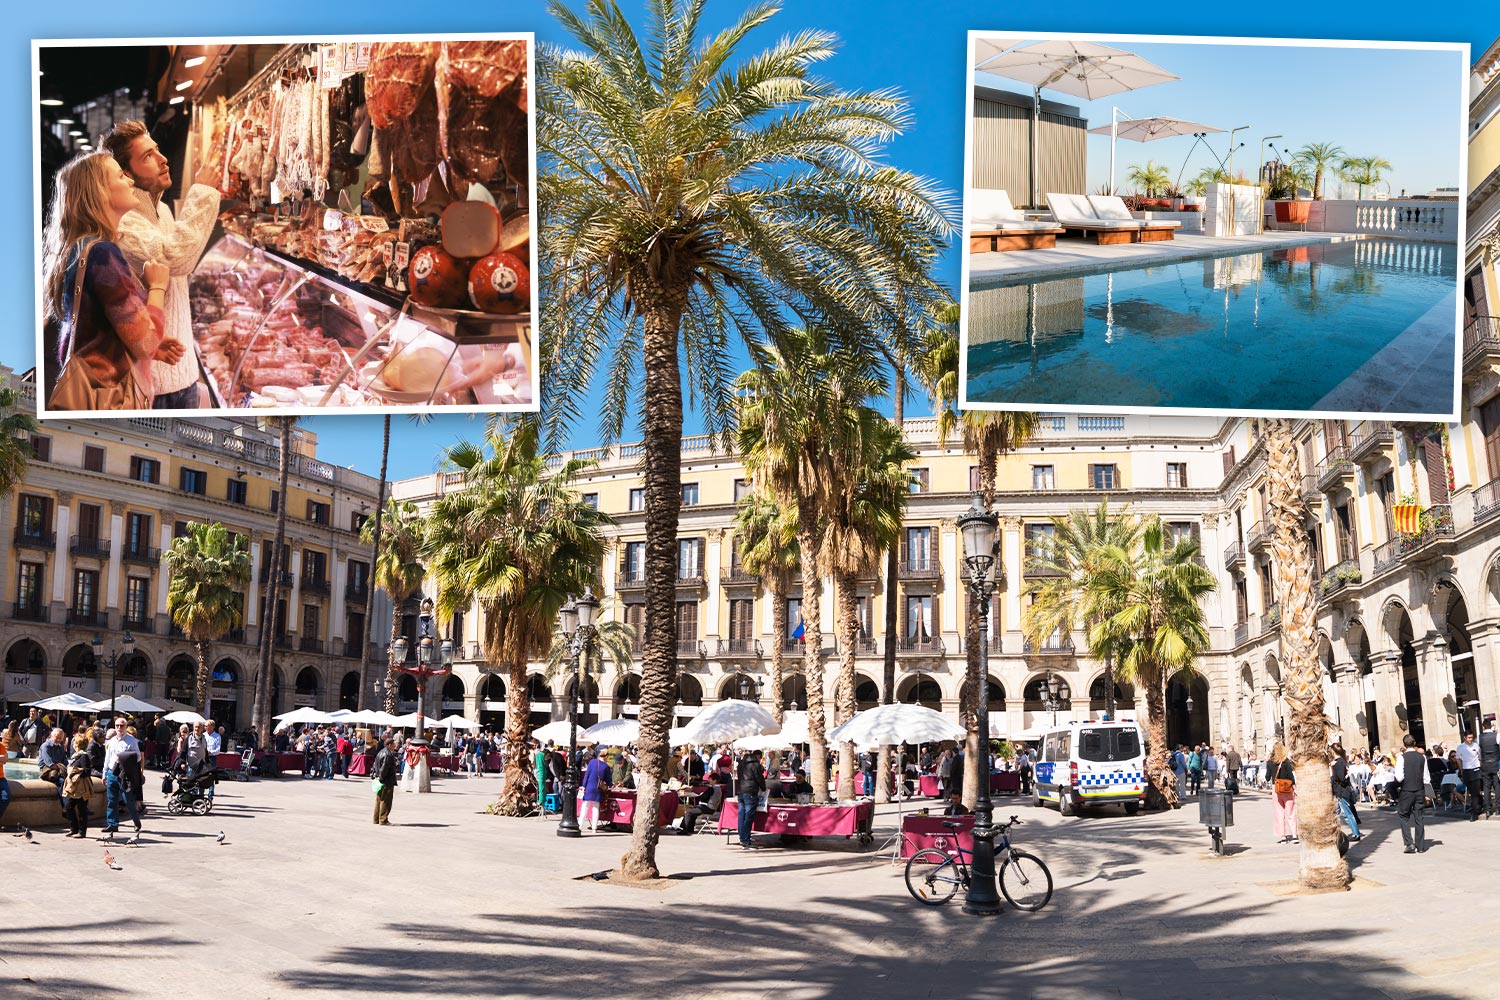 The Spanish city with cheap tapas, rooftop bars and £13 flights